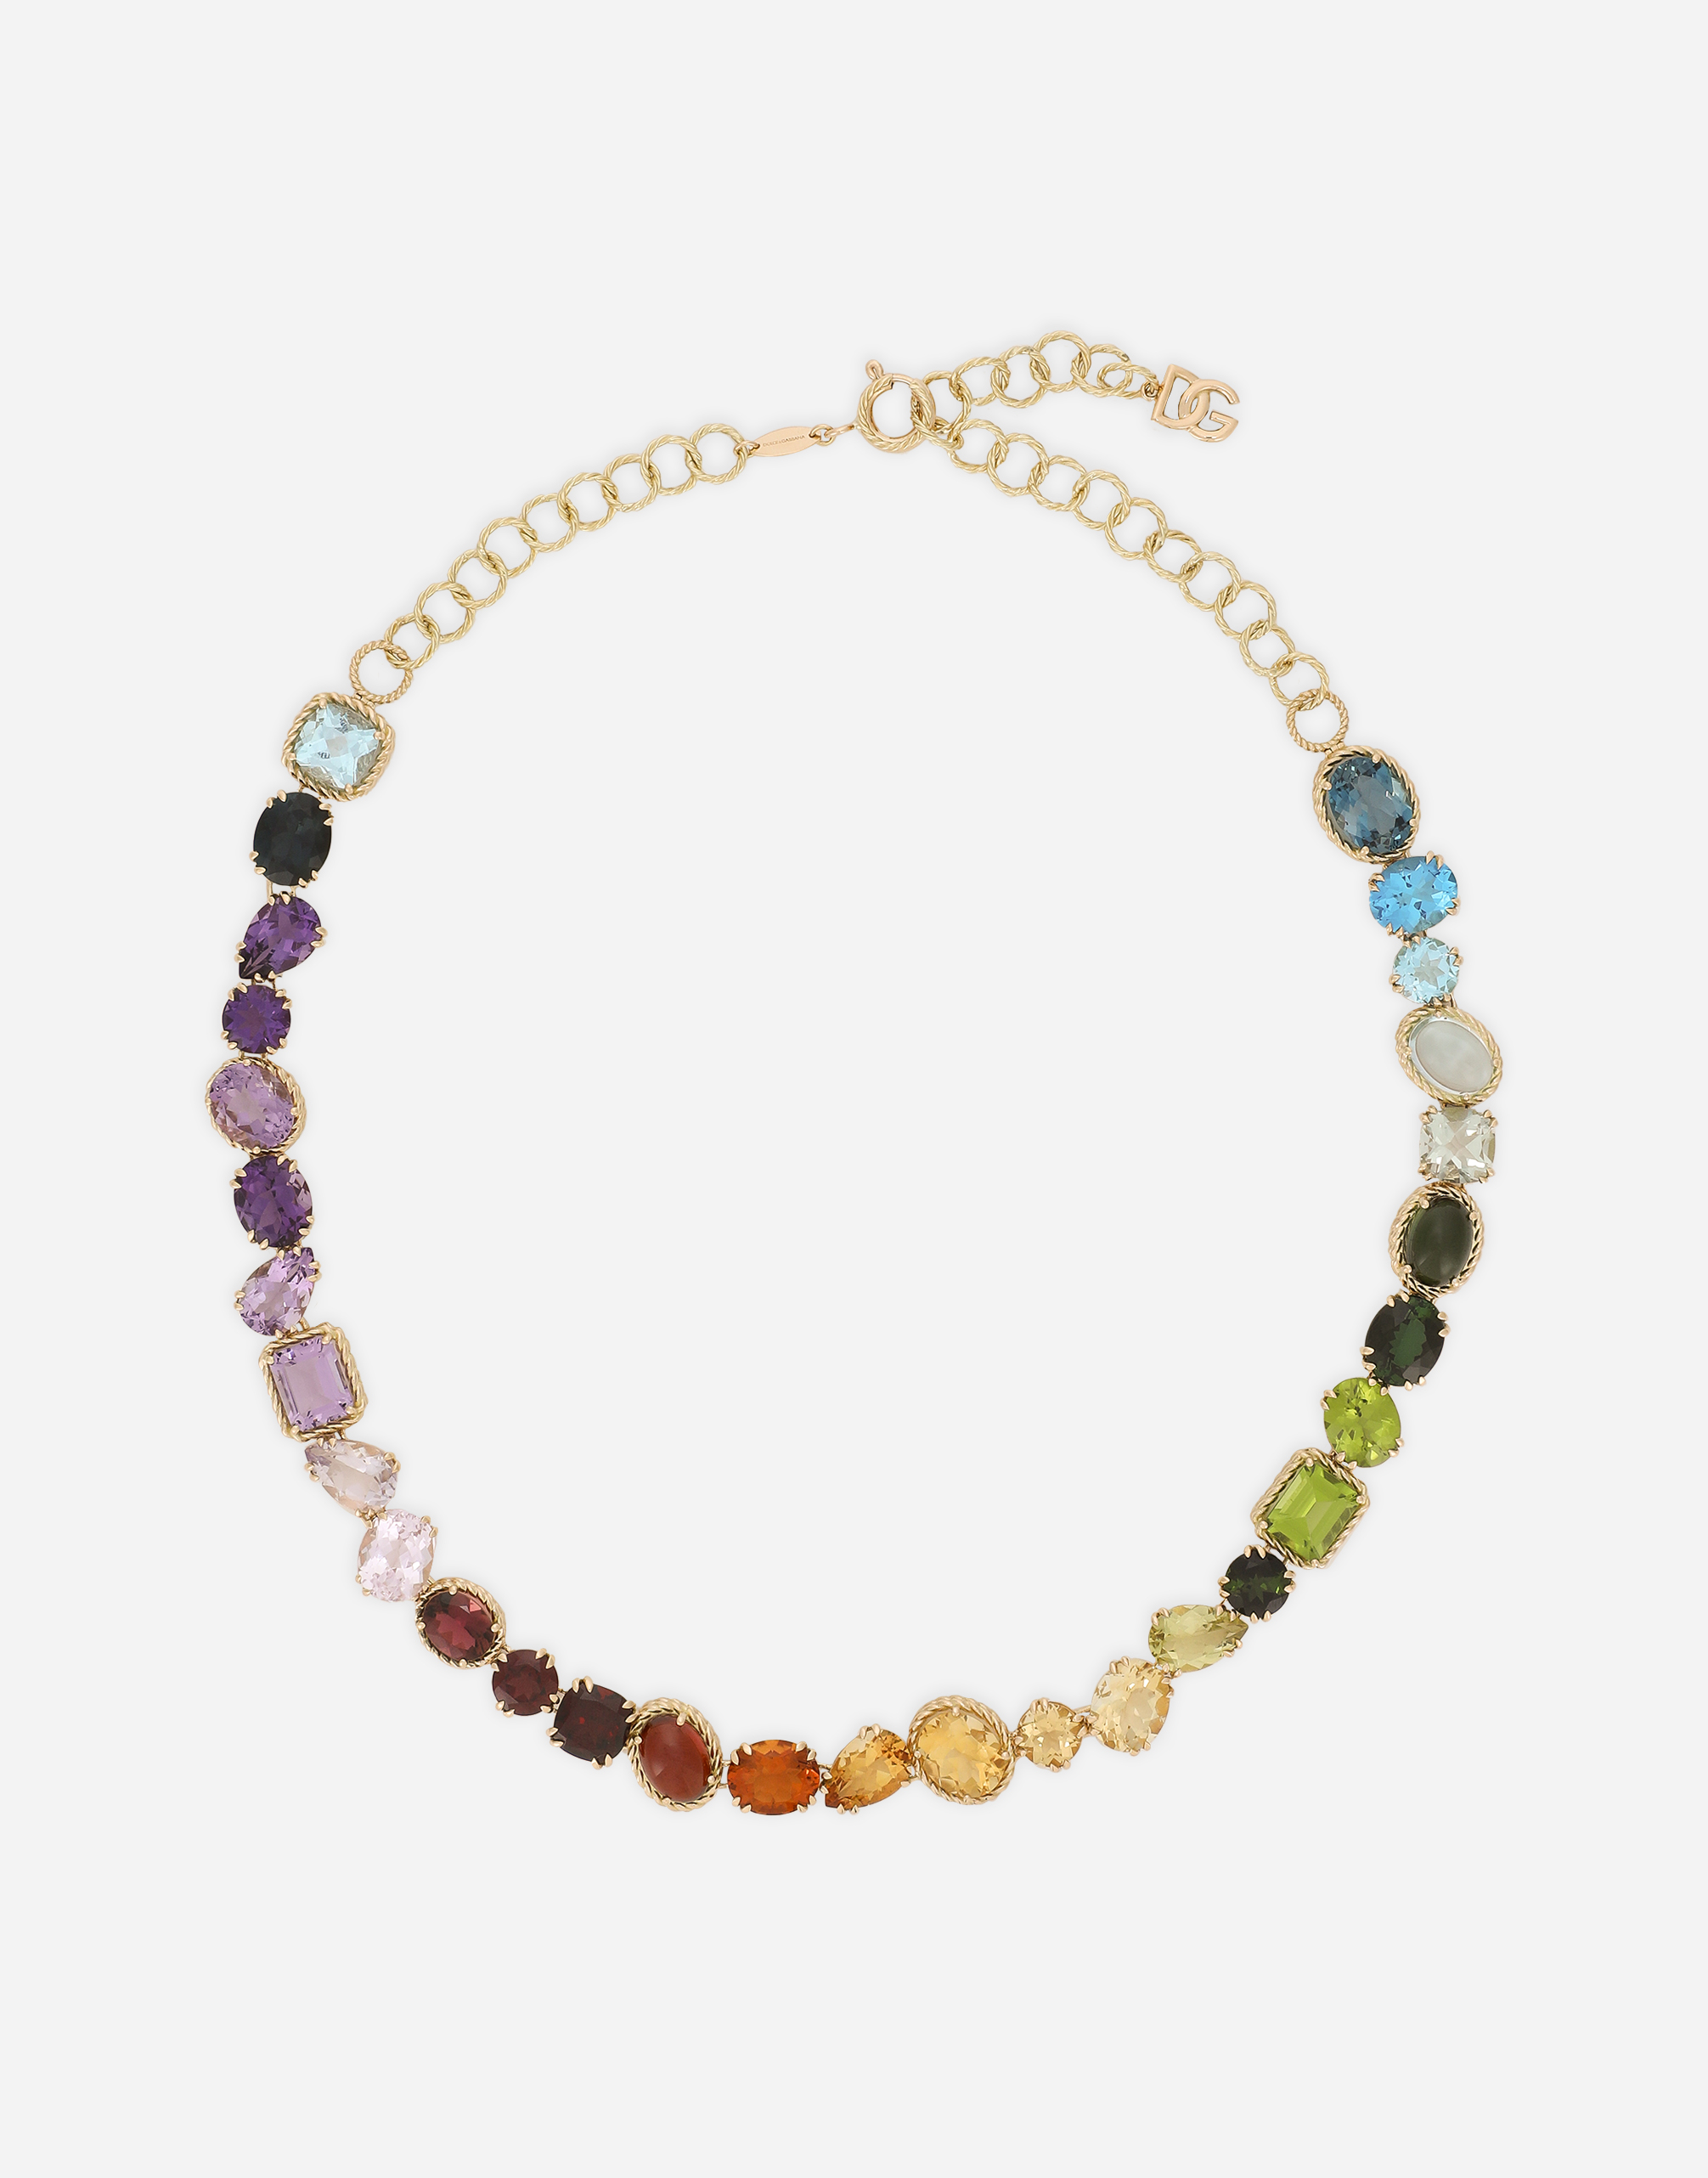 Necklace with multi-colored gems in Gold